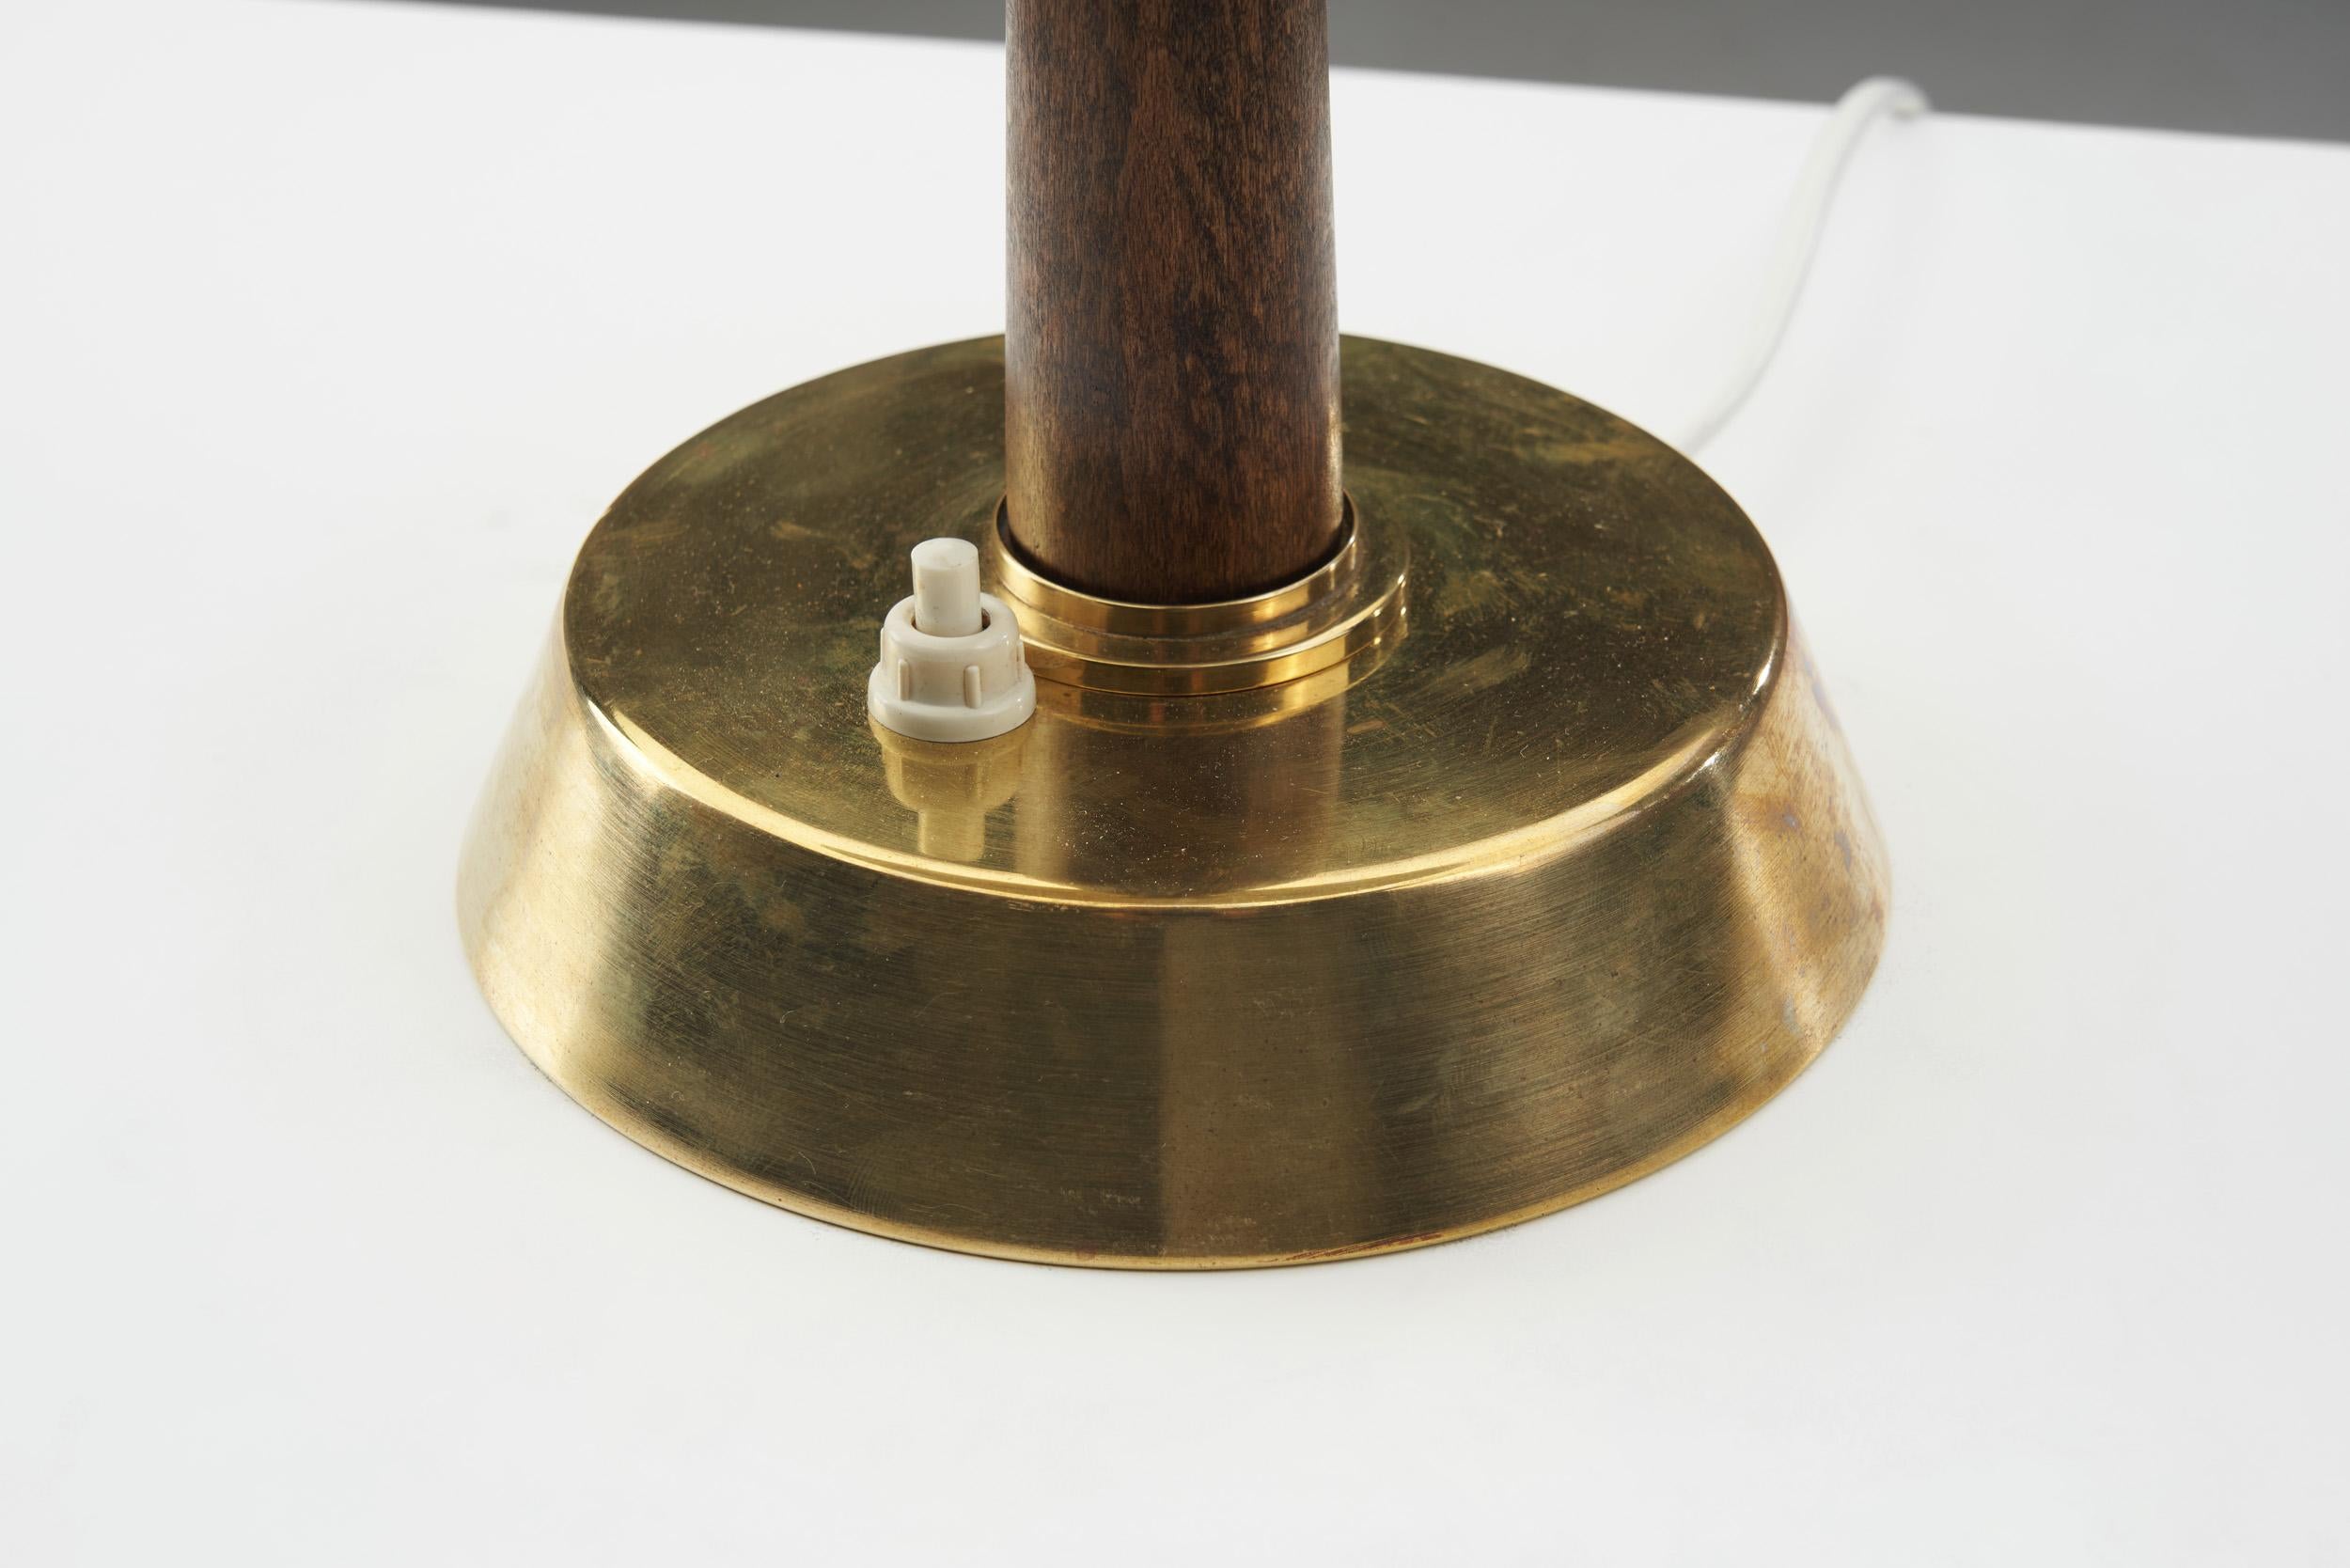 AB E. Hansson & Co. Brass Table Lamp with Adjustable Shade, Sweden 1950s For Sale 8